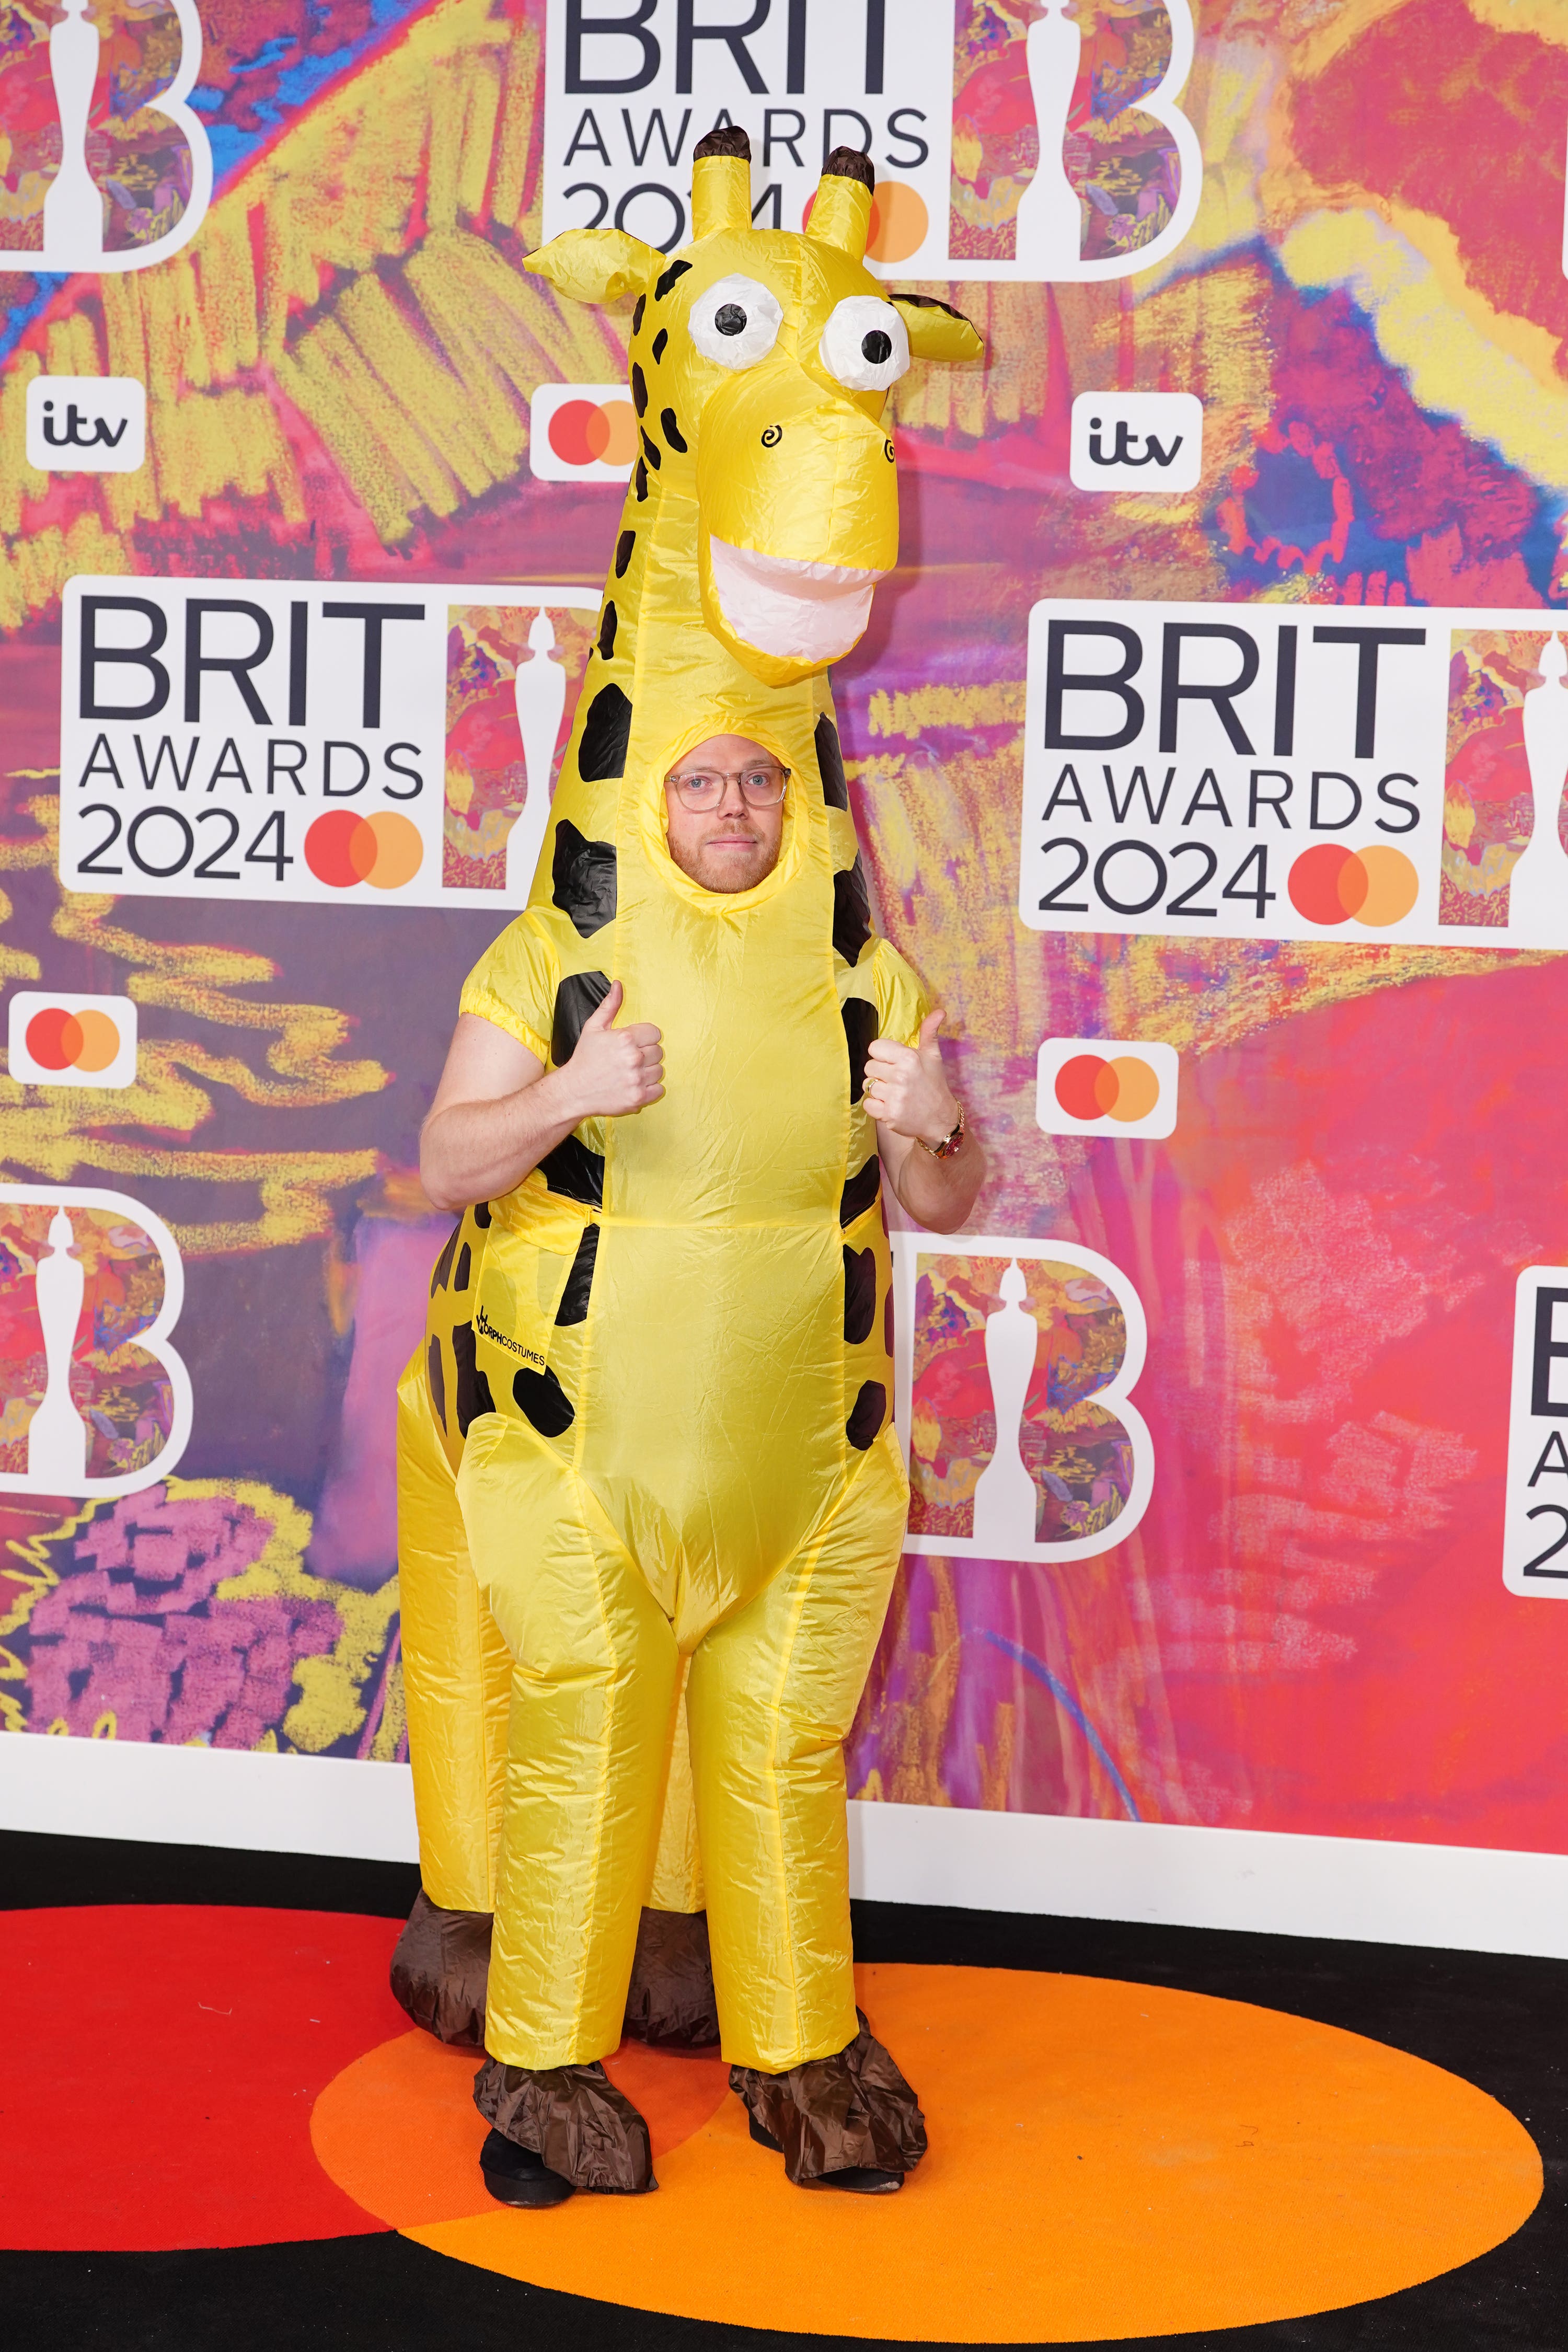 Rob Beckett wore an inflatable giraffe outfit to the Brit Awards.